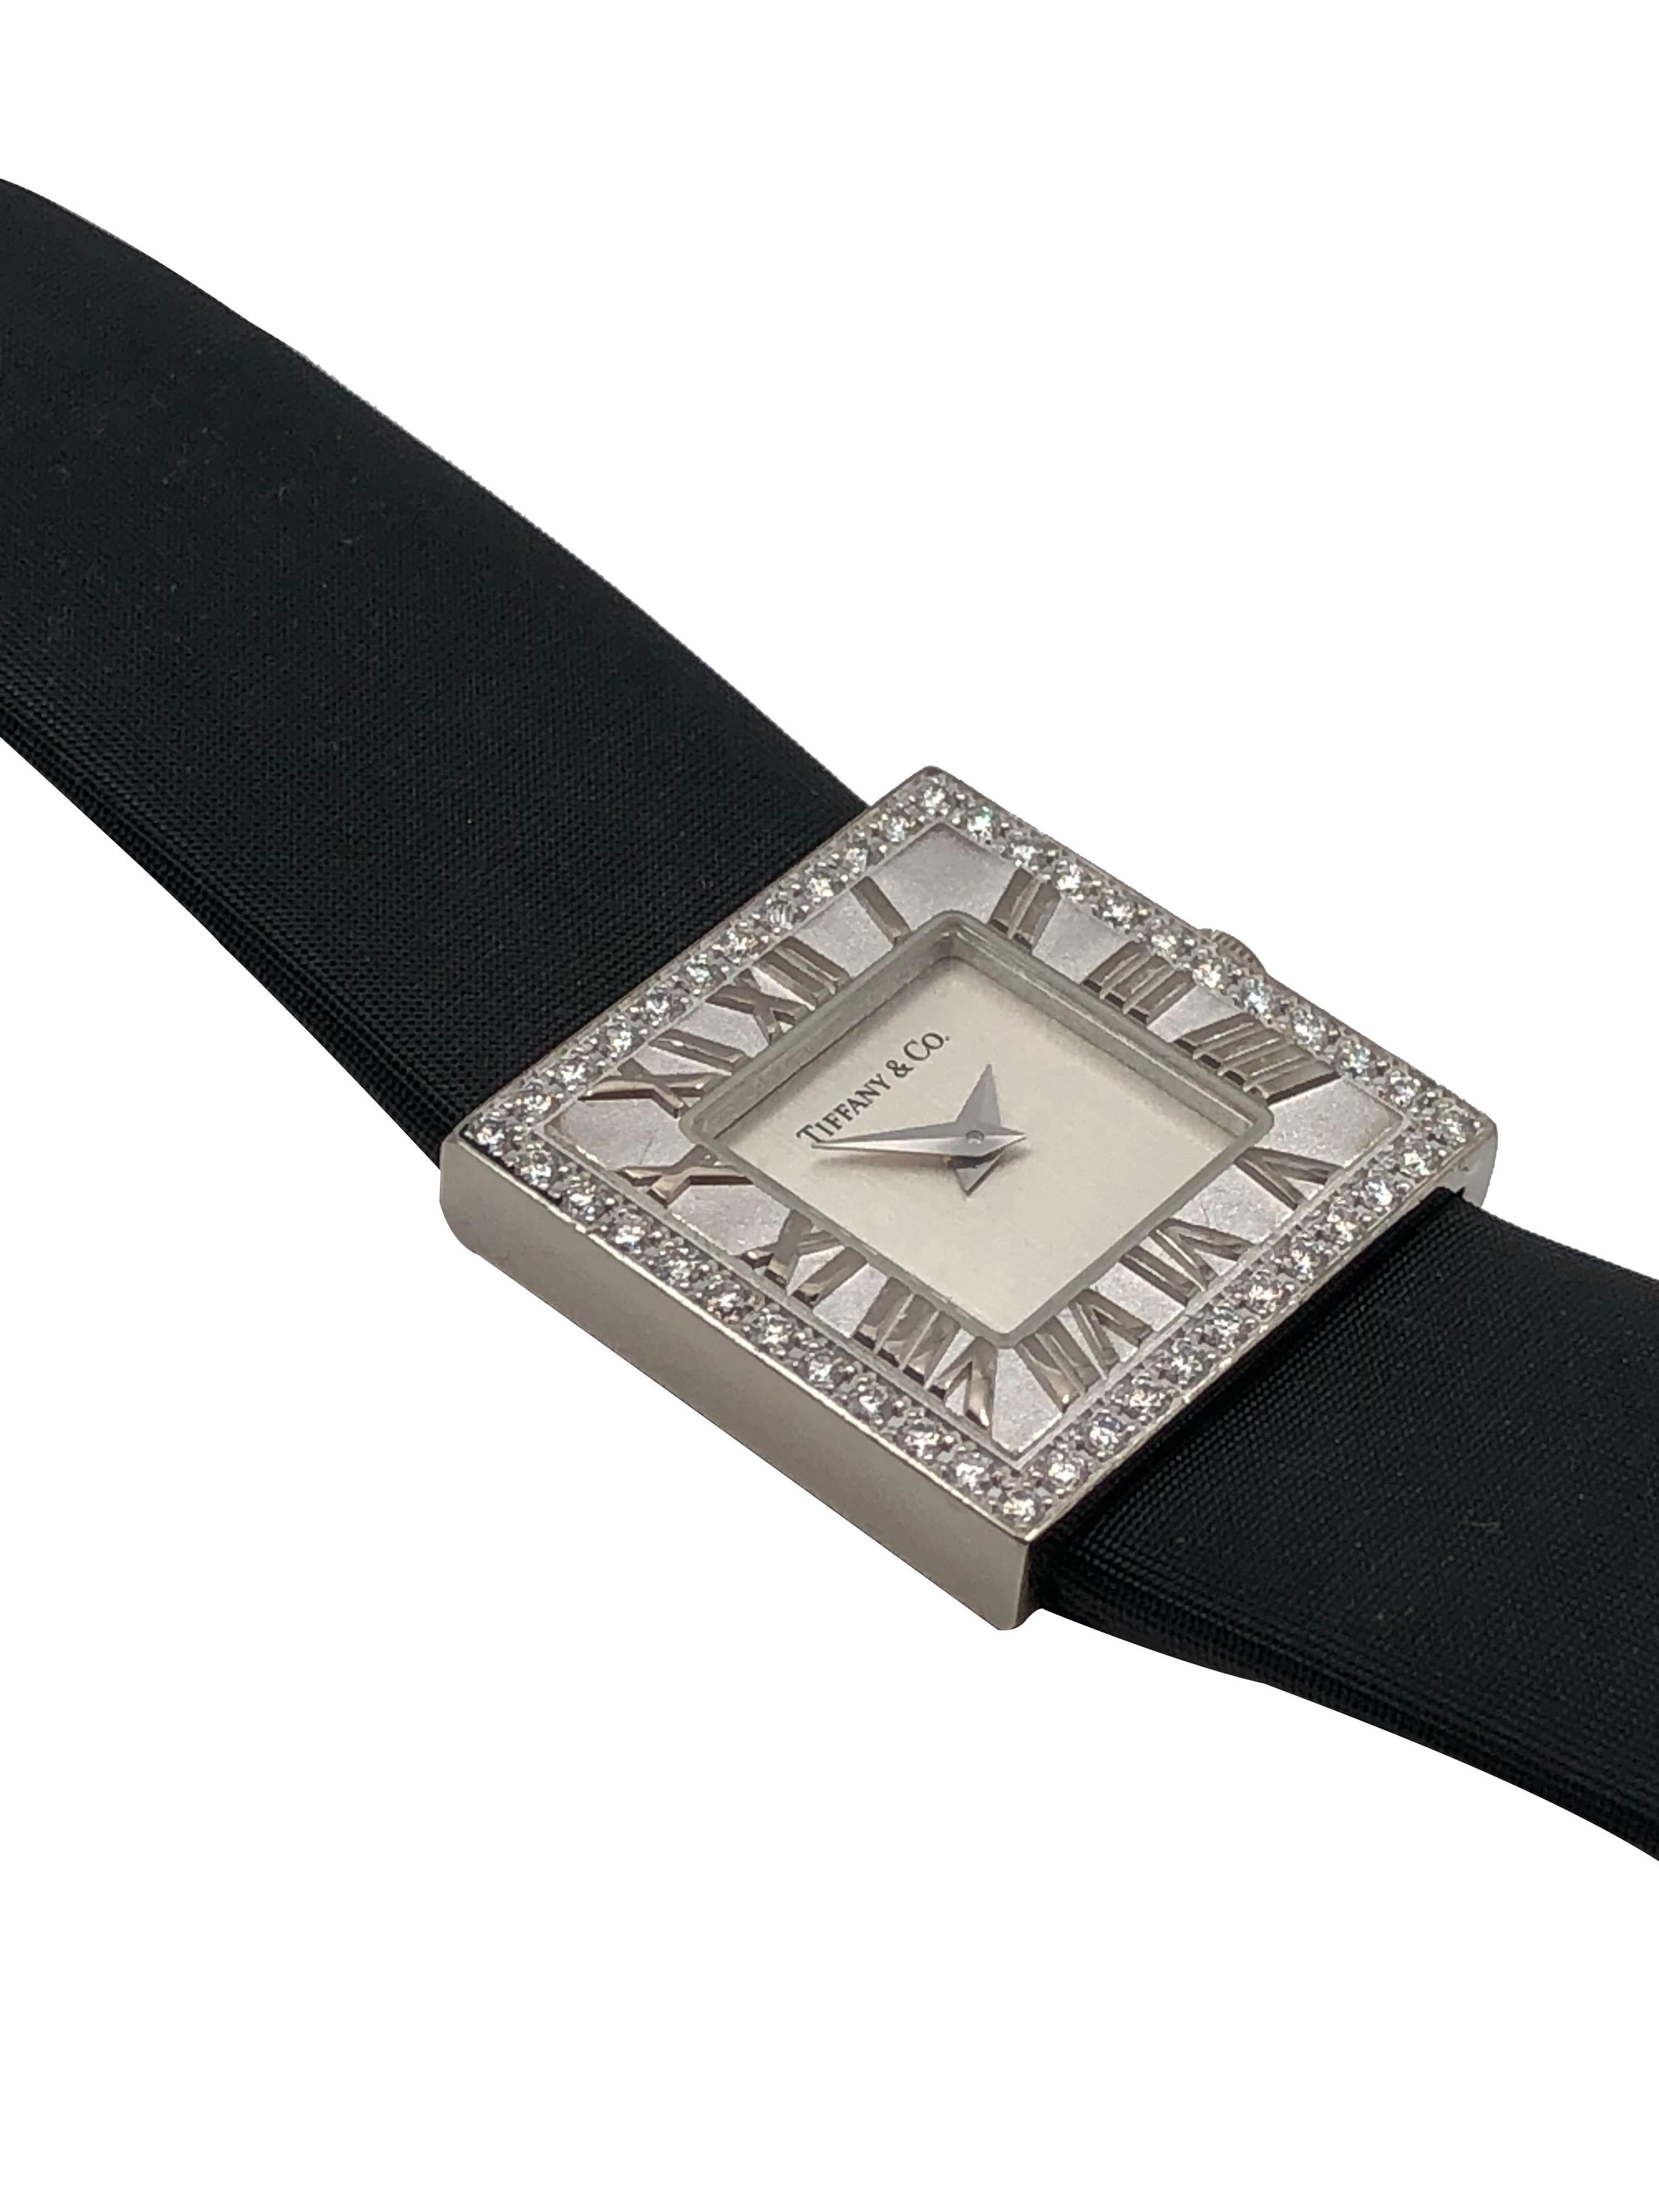 Circa 2005 Tiffany & Company 18K White Gold Atlas Collection Wrist Watch, 21 X 21 MM Water Resistant case, Quartz Movement. Silvered Dial. Raised Roman Numerals inner Bezel and outer bezel of round Brilliant cut Diamonds totaling approximately 1